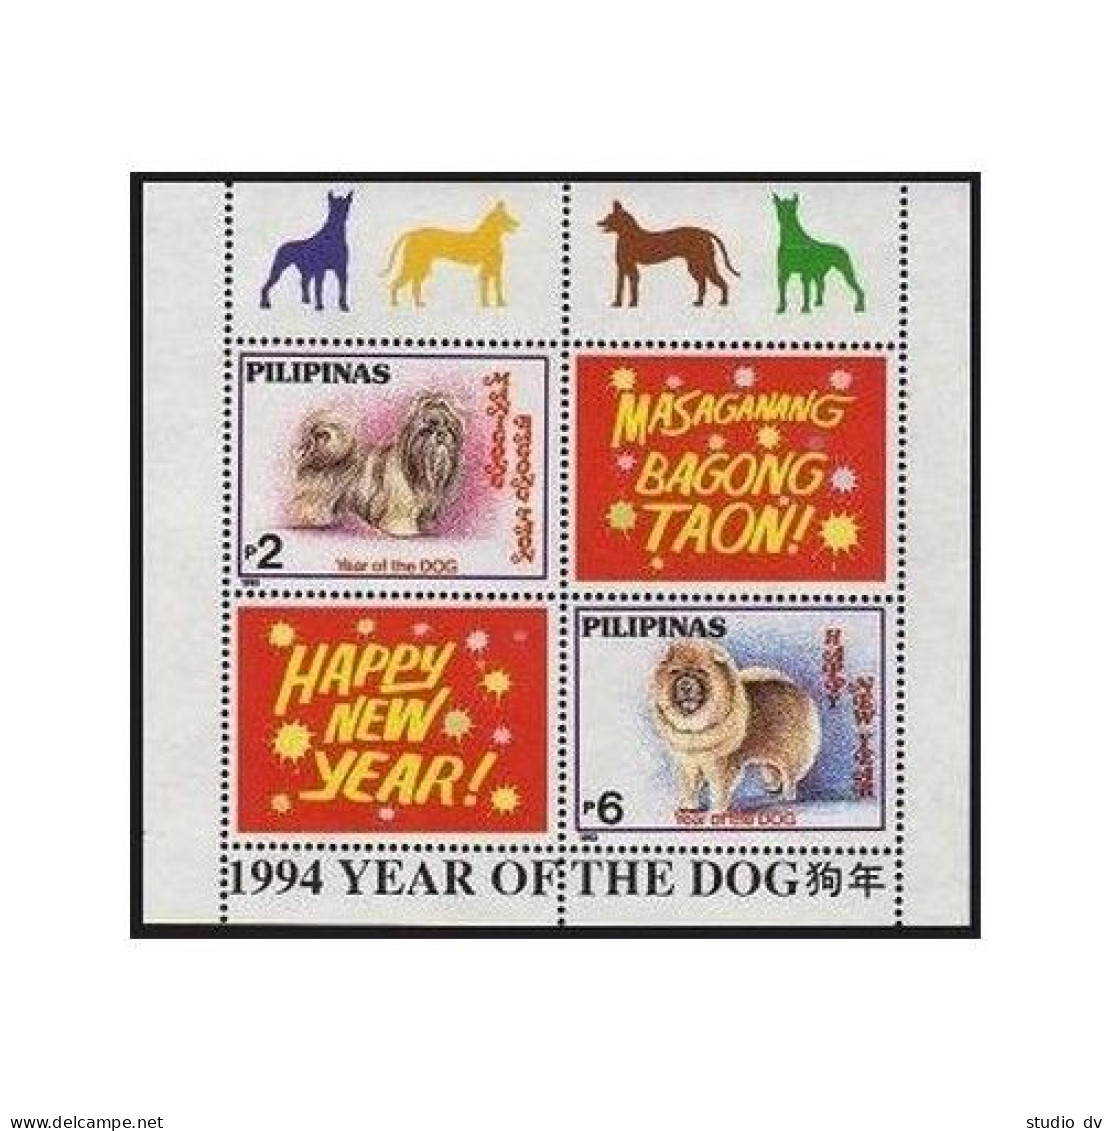 Philippines 2284-2285,2285a A,B,MNH. New Year 1994,Lunar Year of the Dog.